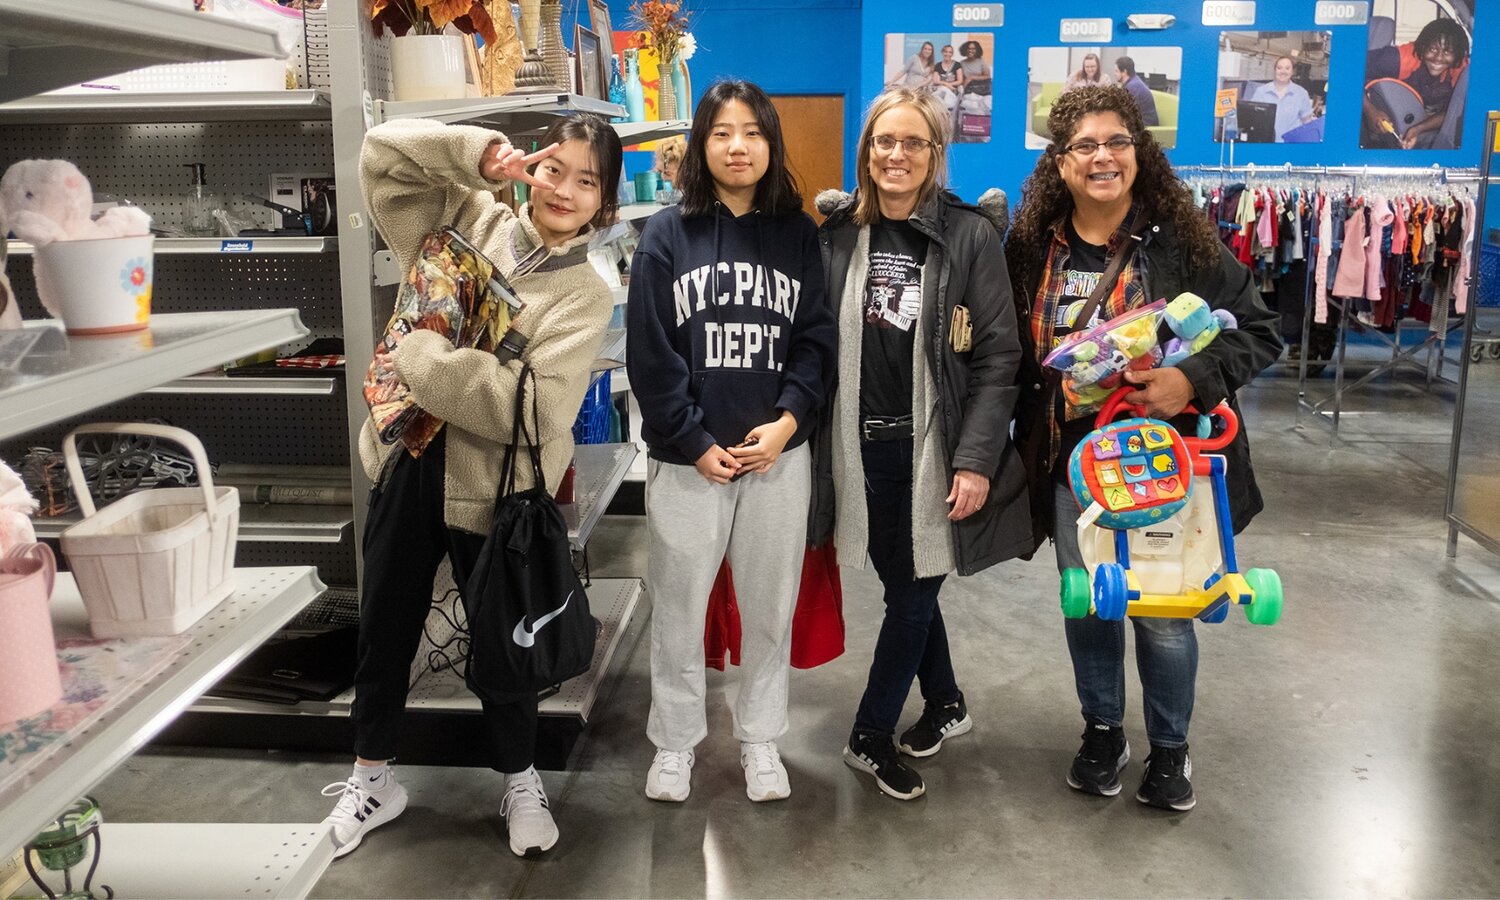 Angela Martino-Lewis (right) takes PSU international students shopping at a thrift store. Lewis has served as a host to many international students, and has participated in Pitt State’s Friendship Family program since 2018.